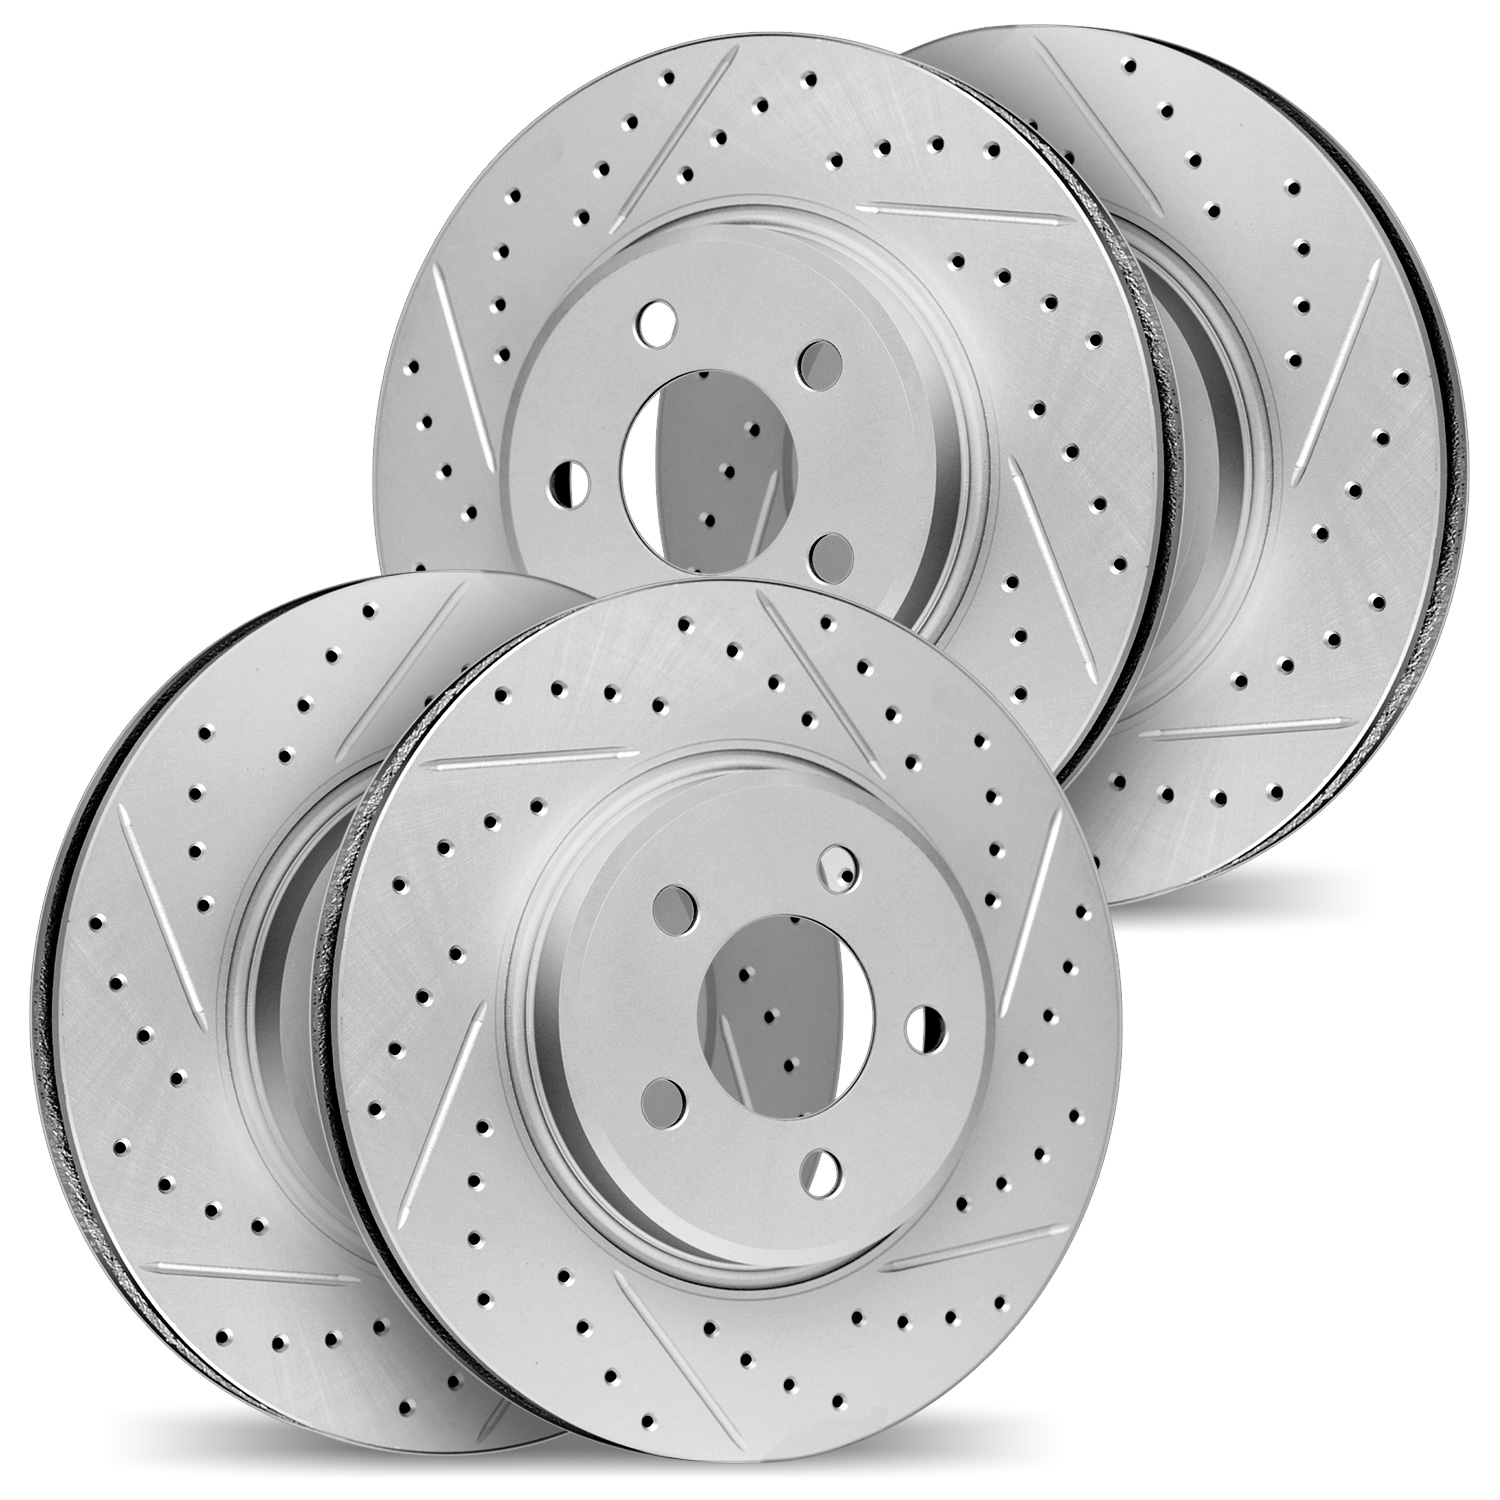 2004-76070 Geoperformance Drilled/Slotted Brake Rotors, 1993-1998 Lexus/Toyota/Scion, Position: Front and Rear